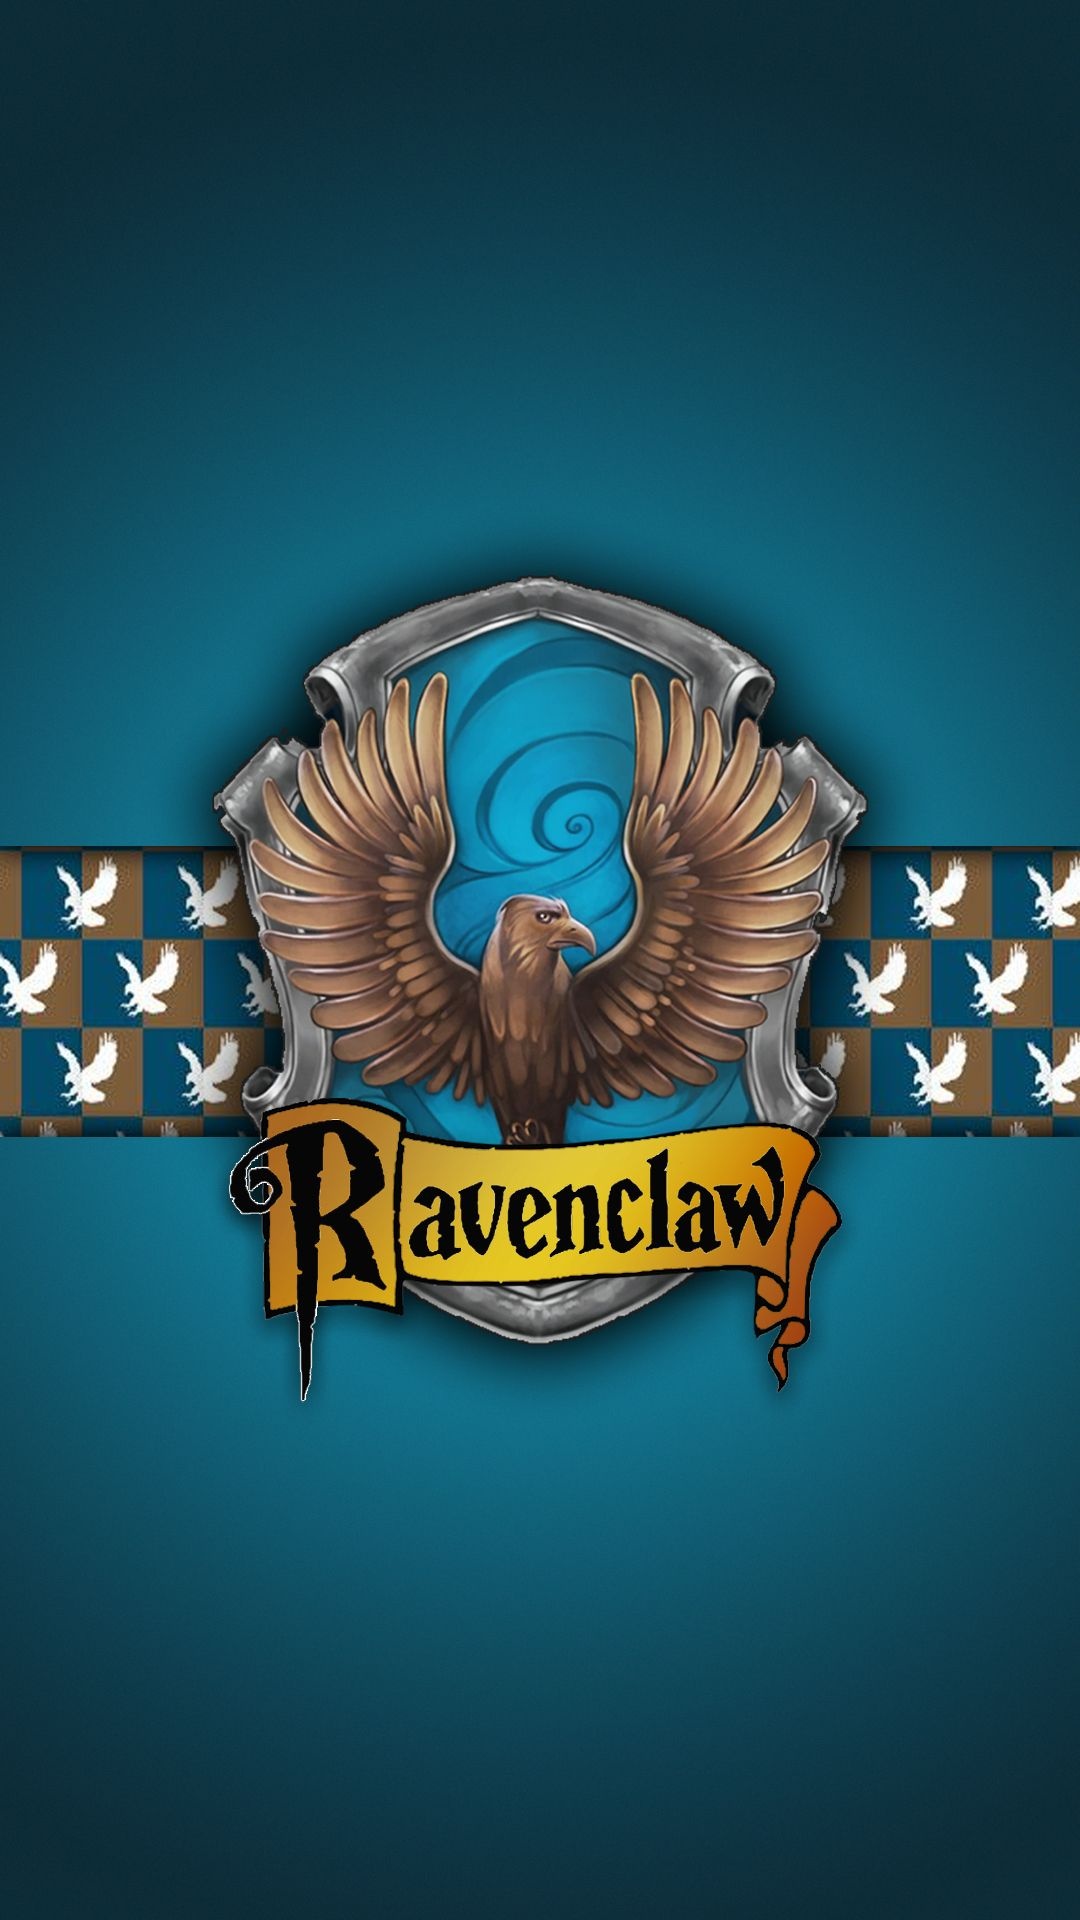 Harry Potter Ravenclaw, HD phone wallpaper, House pride, Magical atmosphere, 1080x1920 Full HD Handy